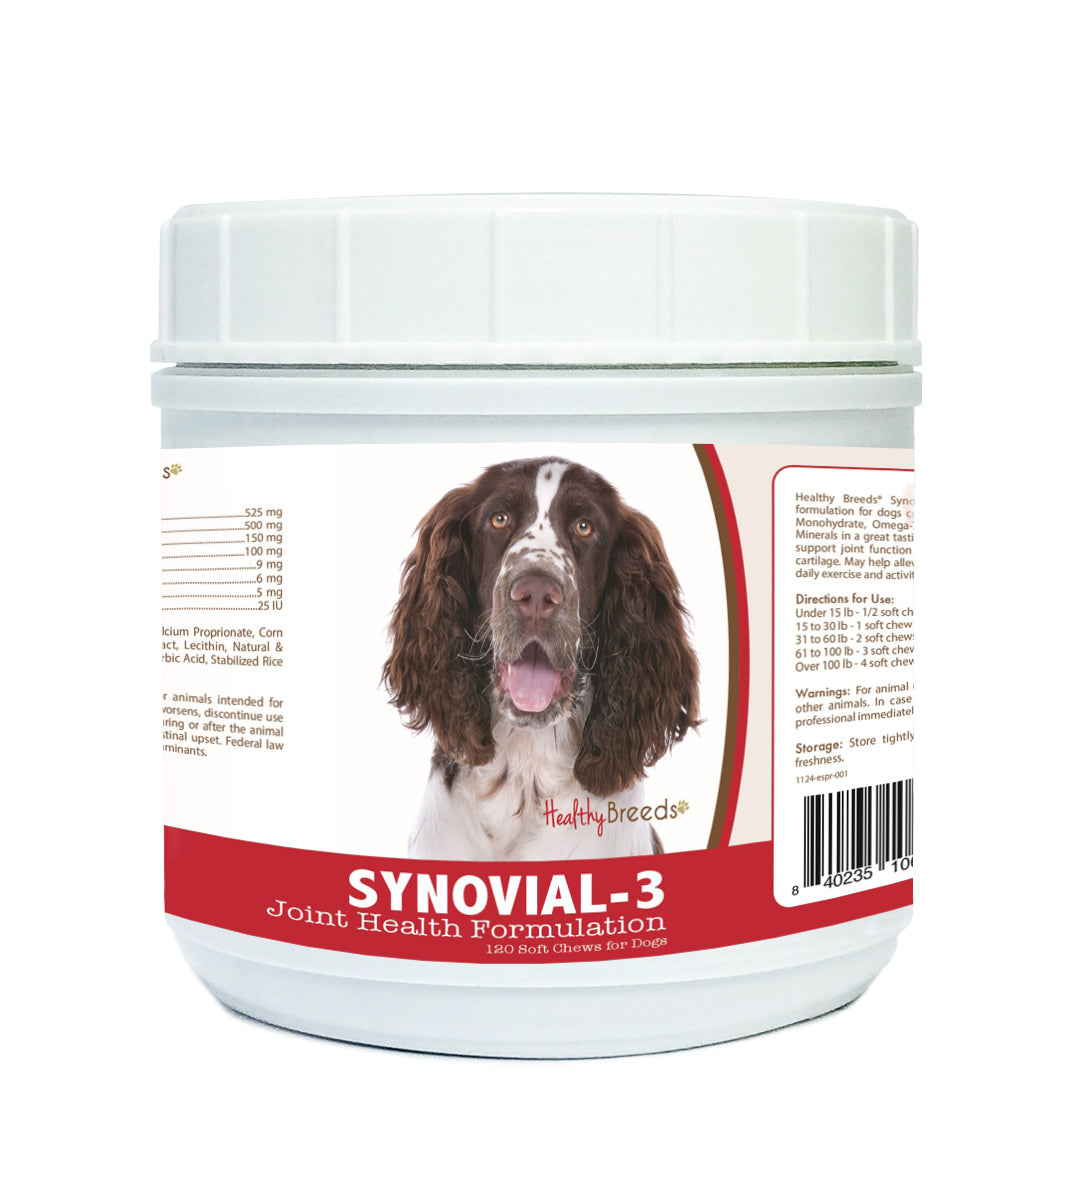 English Springer Spaniel Synovial-3 Joint Health Formulation Soft Chews 120 Count